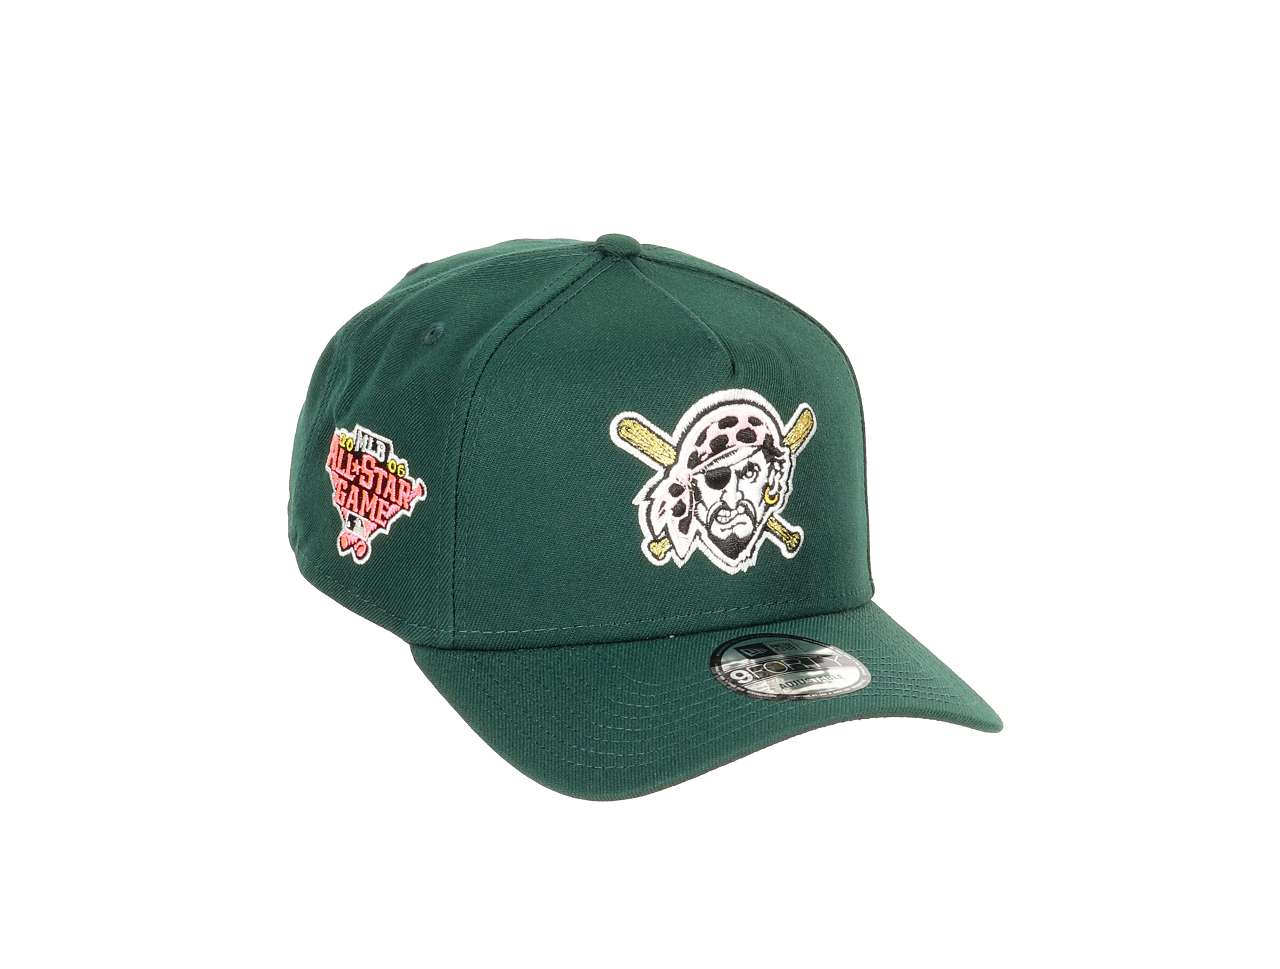 Pittsburgh Pirates MLB All-Star Game 2006 Sidepatch Cooperstown Dark Green 9Forty A-Frame Snapback Cap New Era